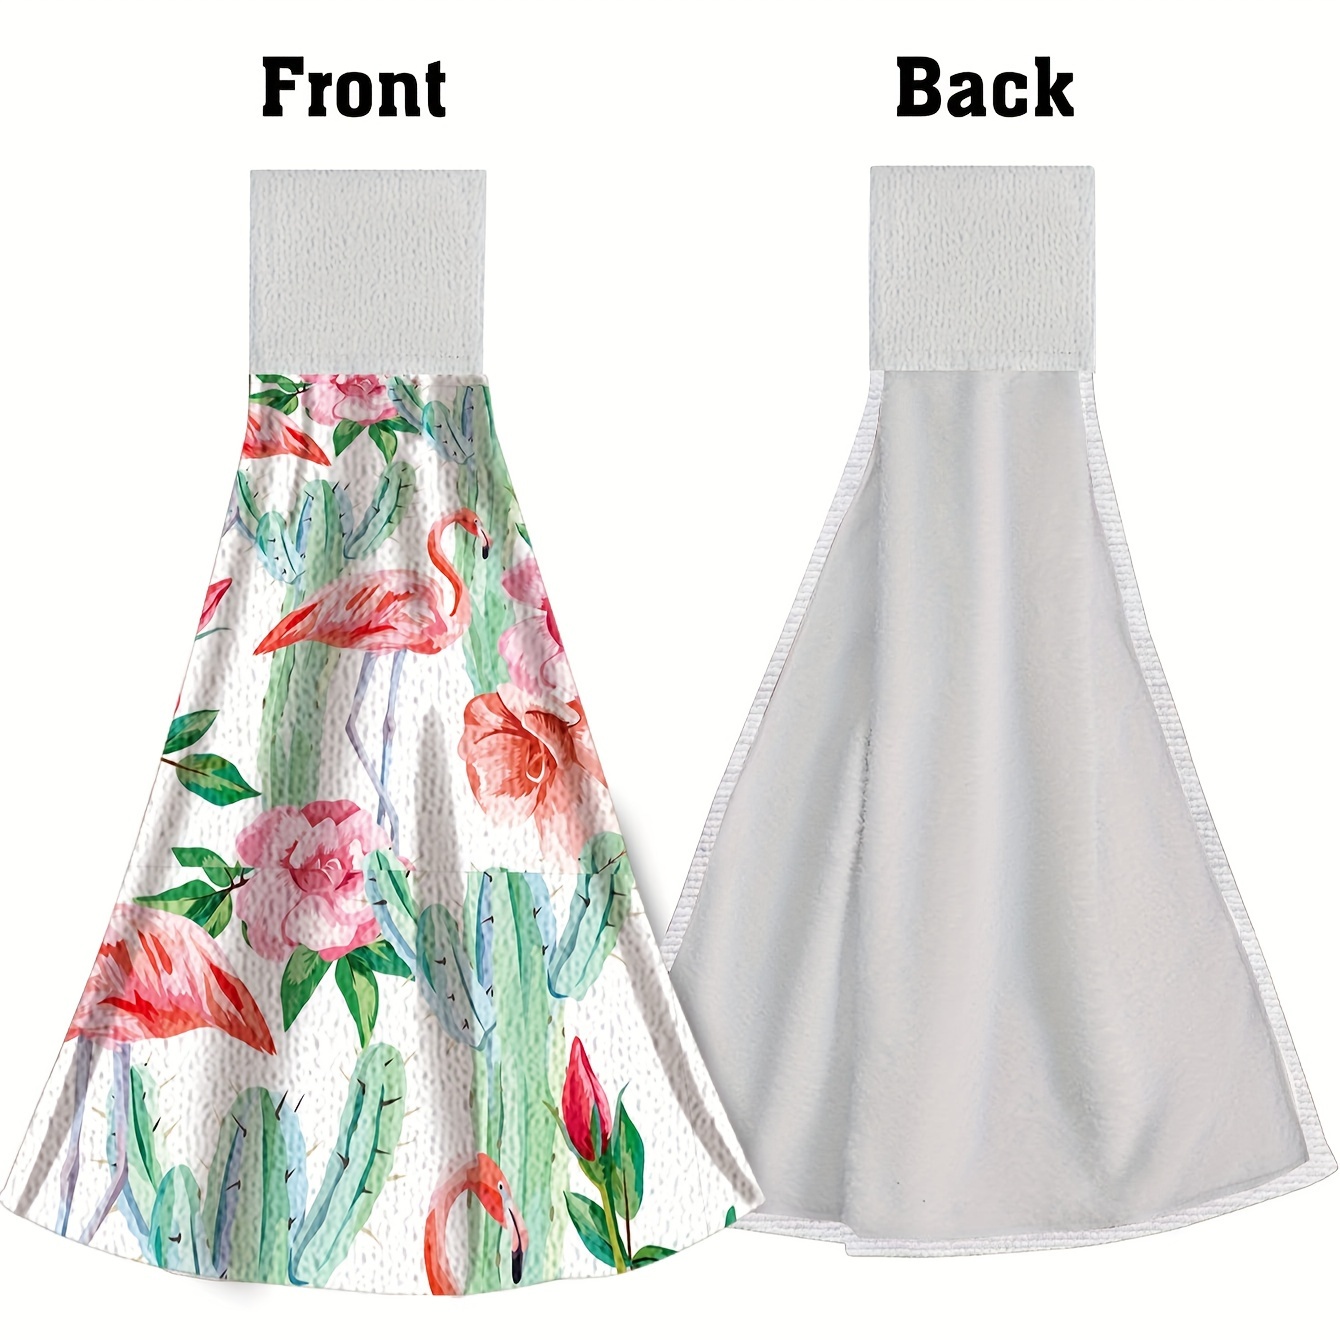 2pcs Kitchen Bathroom Washroom Hanging Tie Hand Towels,Hanging Towel For  Wiping Hands,Highly Absorbent & Quick Drying Dish Towels,Super Absorbent  and Lint Free Towels For bathroom,Washroom Hand Towels,The Flamingo Series